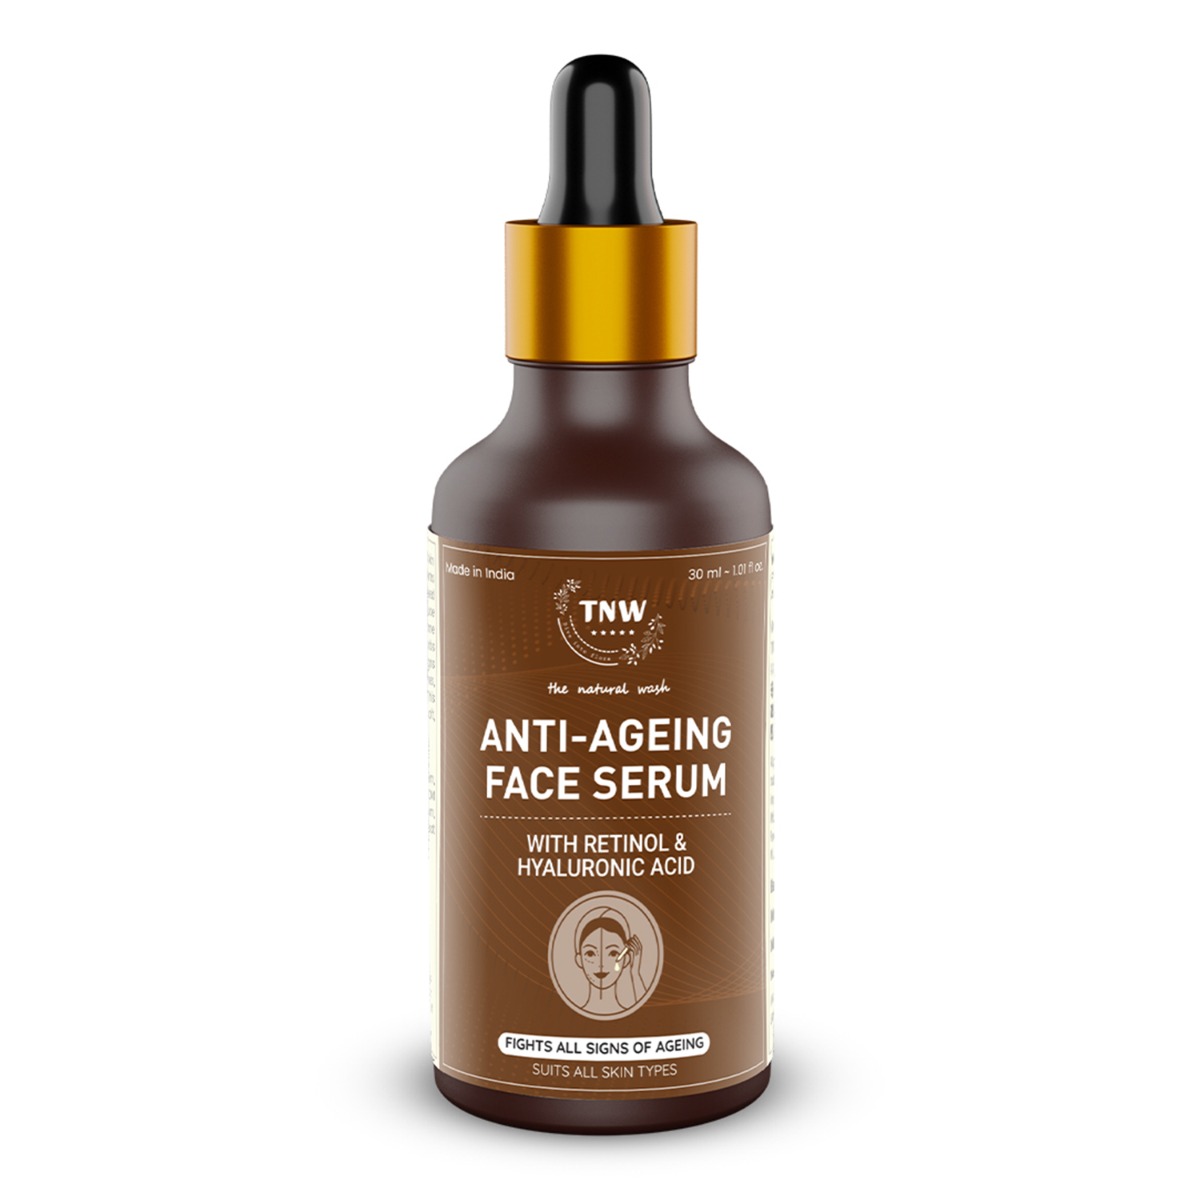 TNW - The Natural Wash Anti-Ageing Face Serum With Retinol & Hyaluronic Acid, 30ml